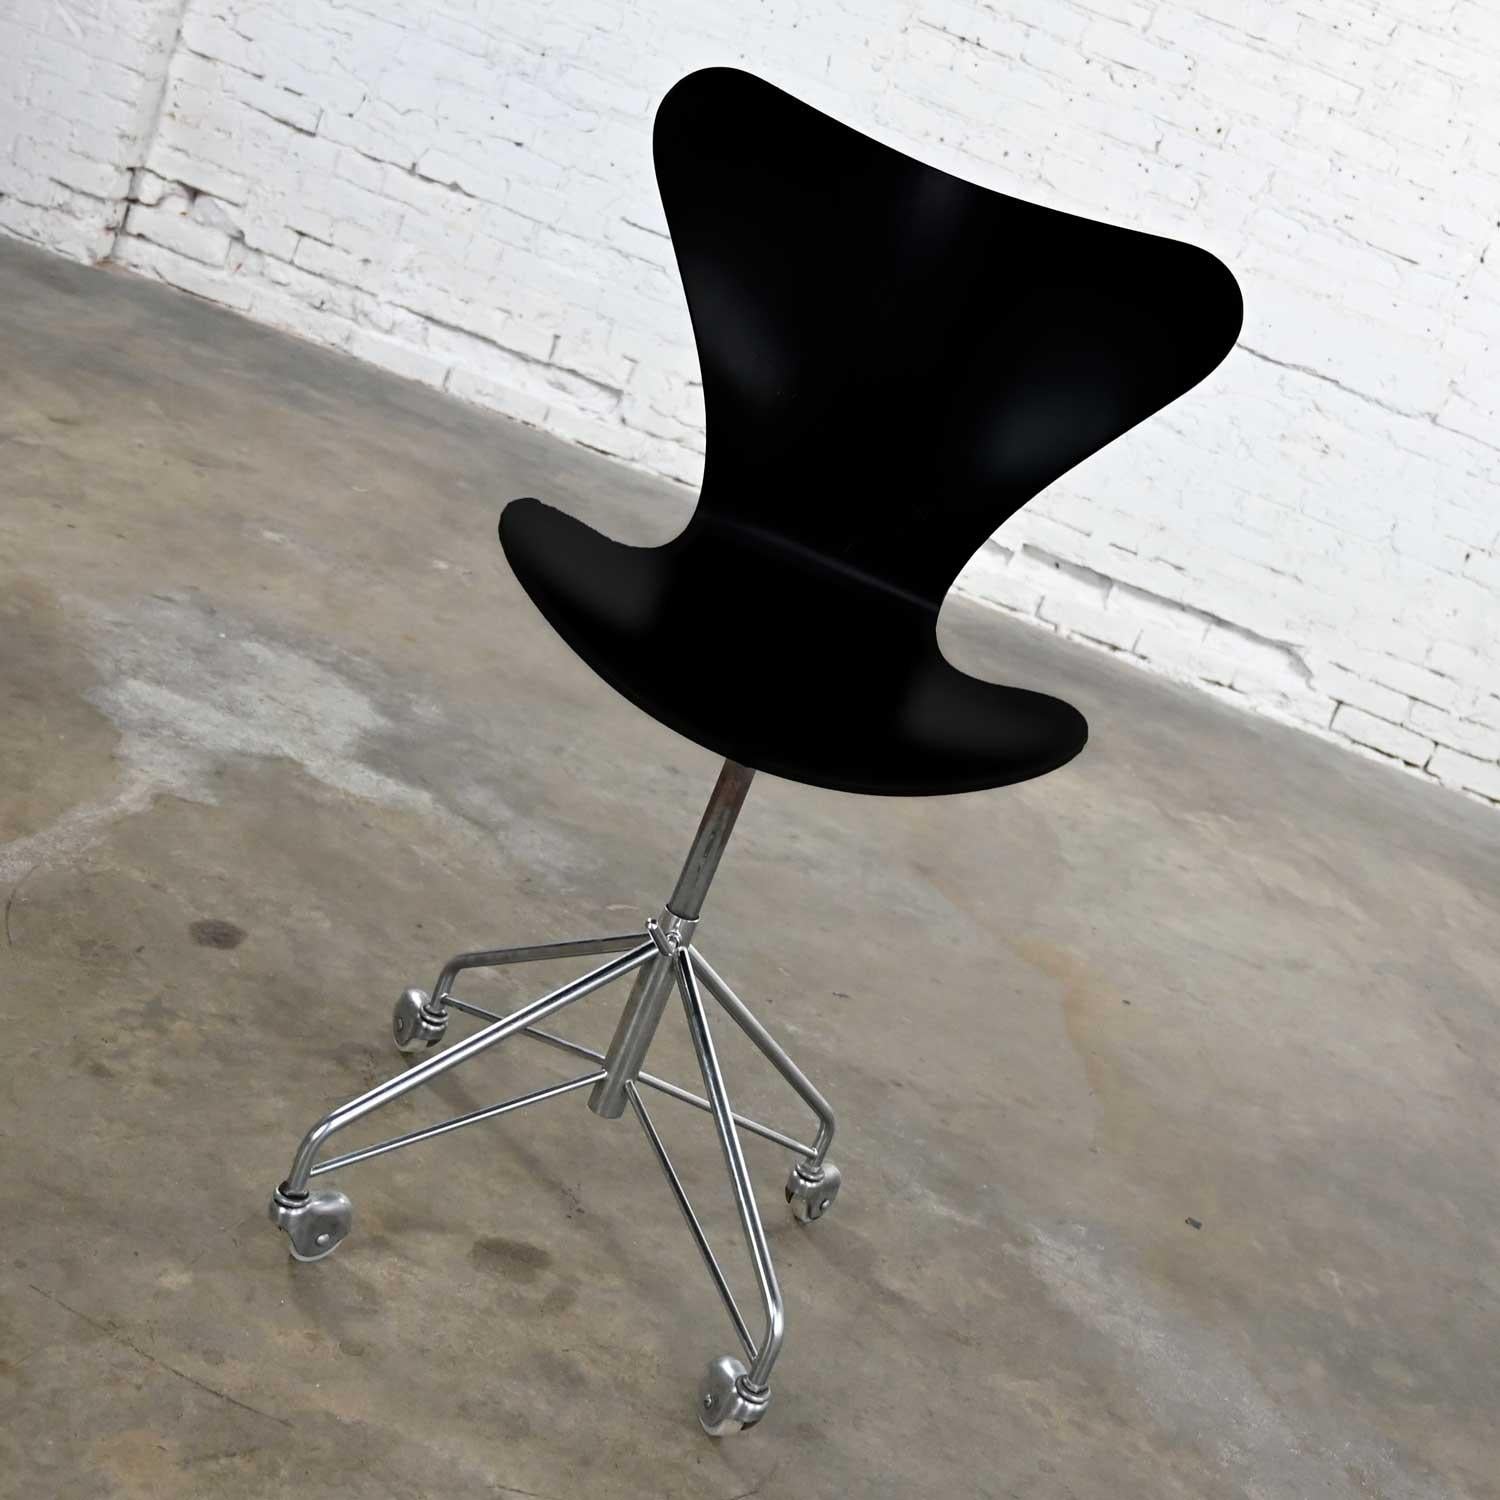 Handsome Scandinavian Modern Arne Jacobsen Series 7 black & chrome office chair designed by Fritz Hansen. Beautiful condition, keeping in mind that this is vintage & not new so will have signs of use and wear. There are a few dents & nicks as you